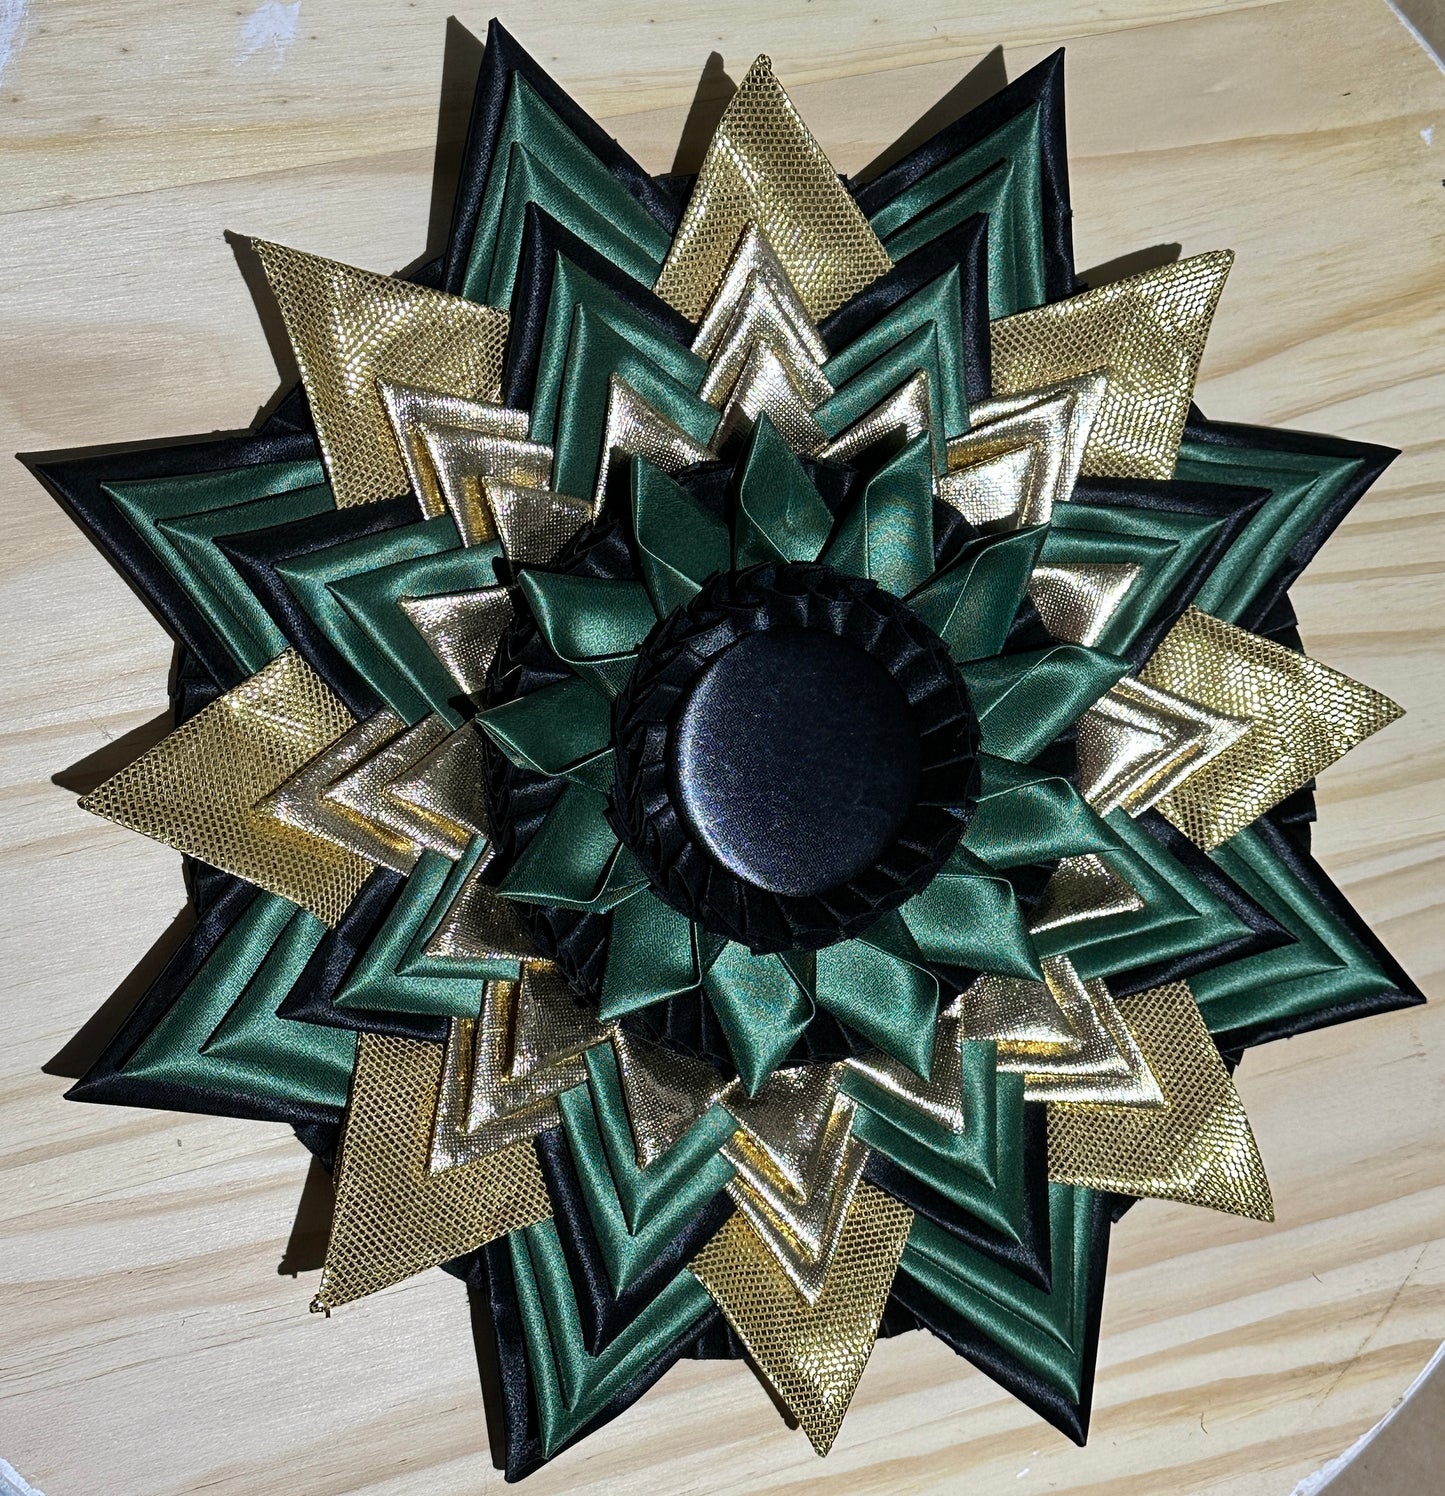 13" Black/Green Rosette with 5x 30" streamers